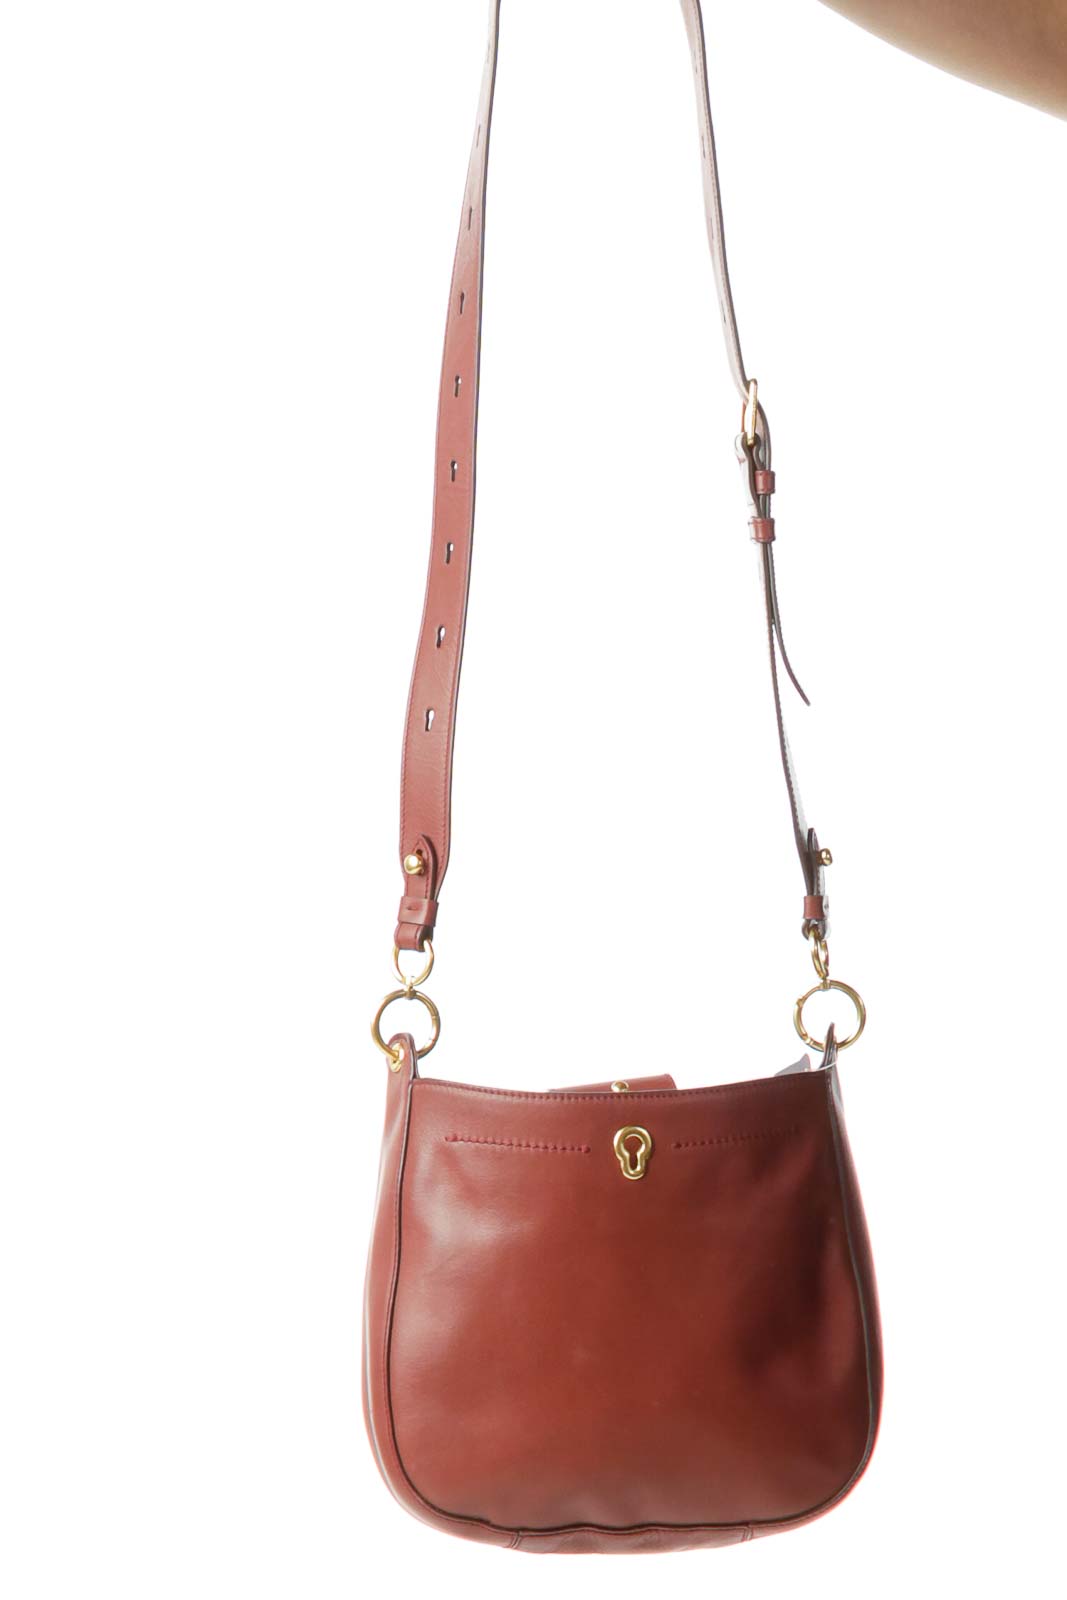 Brown Leather Crossbody Bag Front